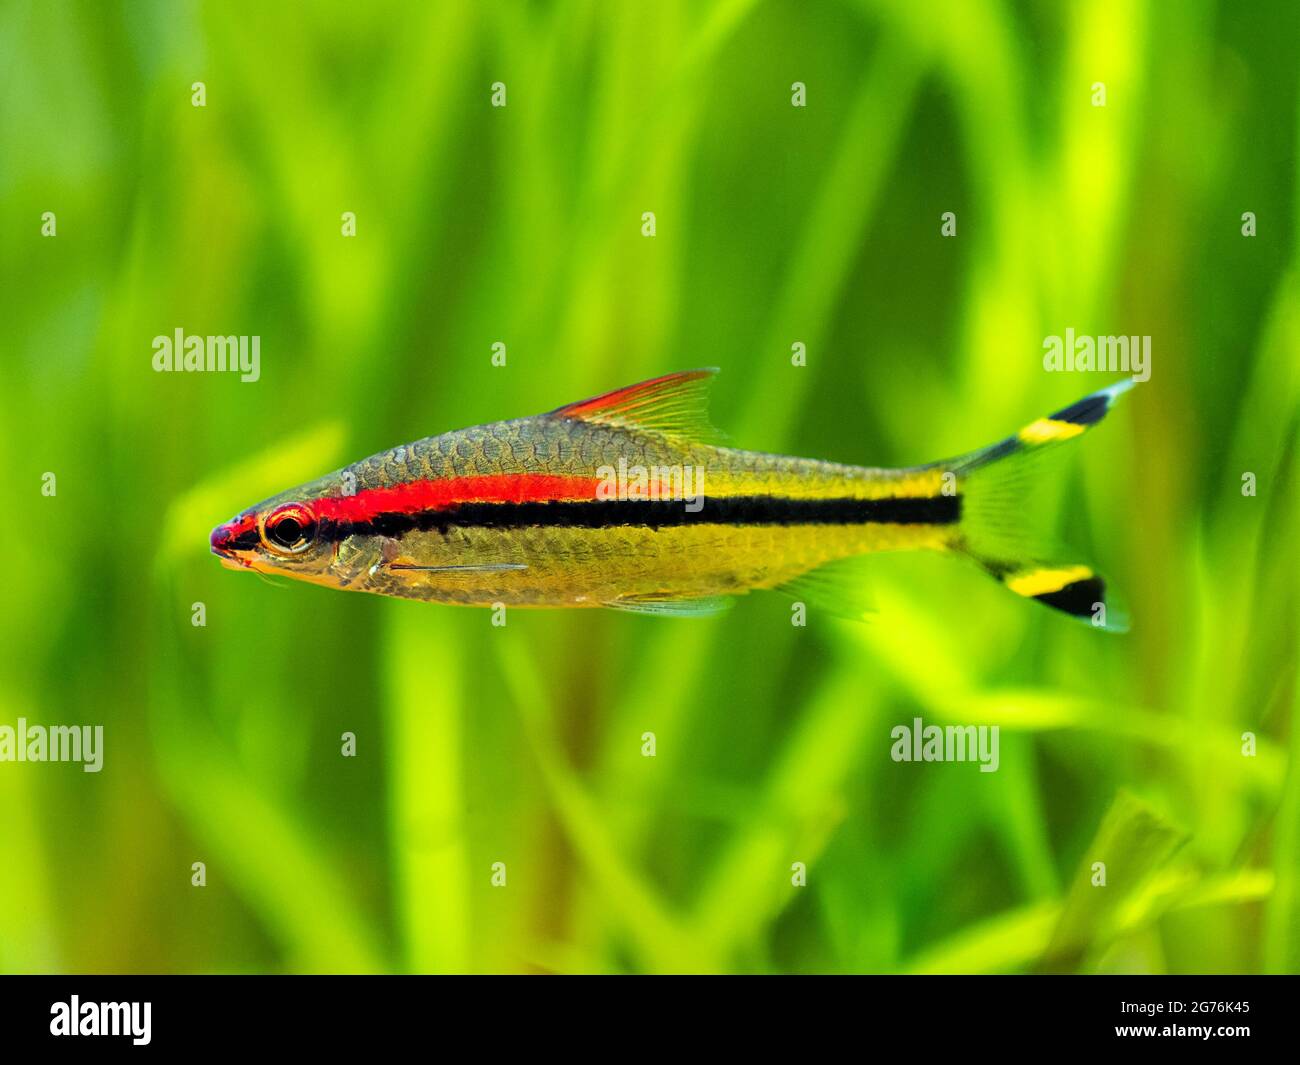 Denison barb (Sahyadria denisonii) swimming on a fish tank with blurred background Stock Photo